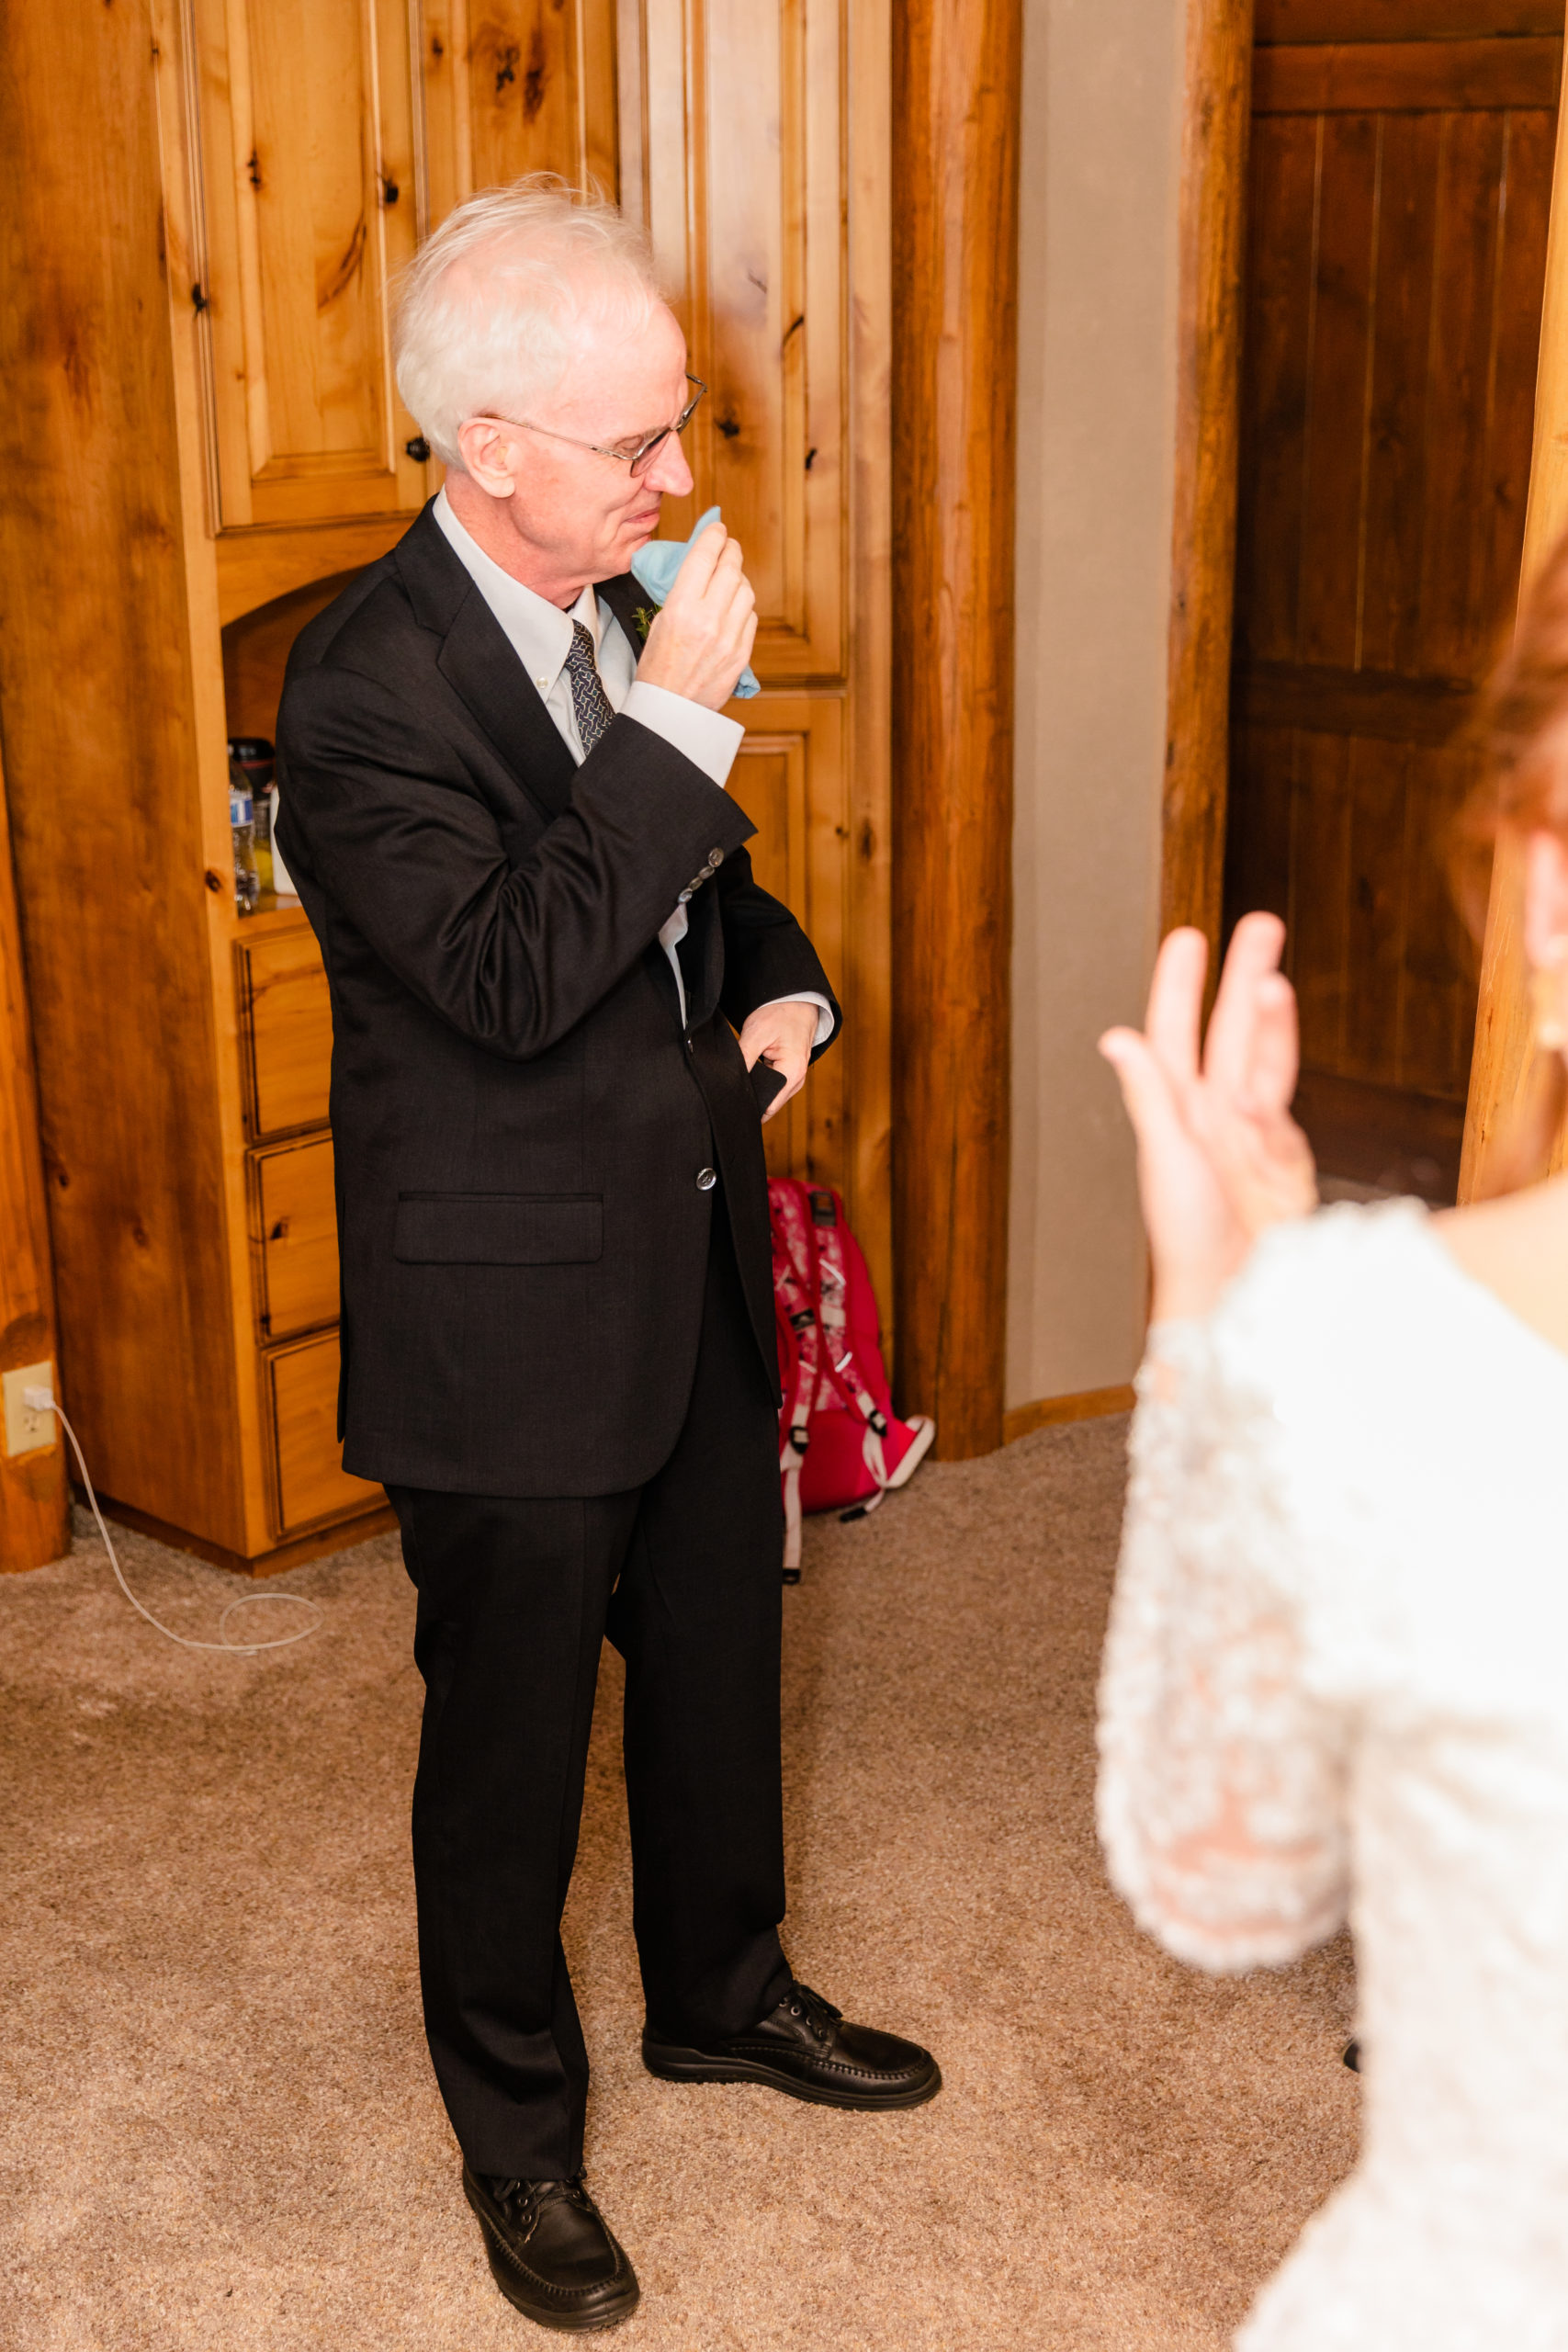 father of the bride wiping away tears as he sees his daughter as a bride